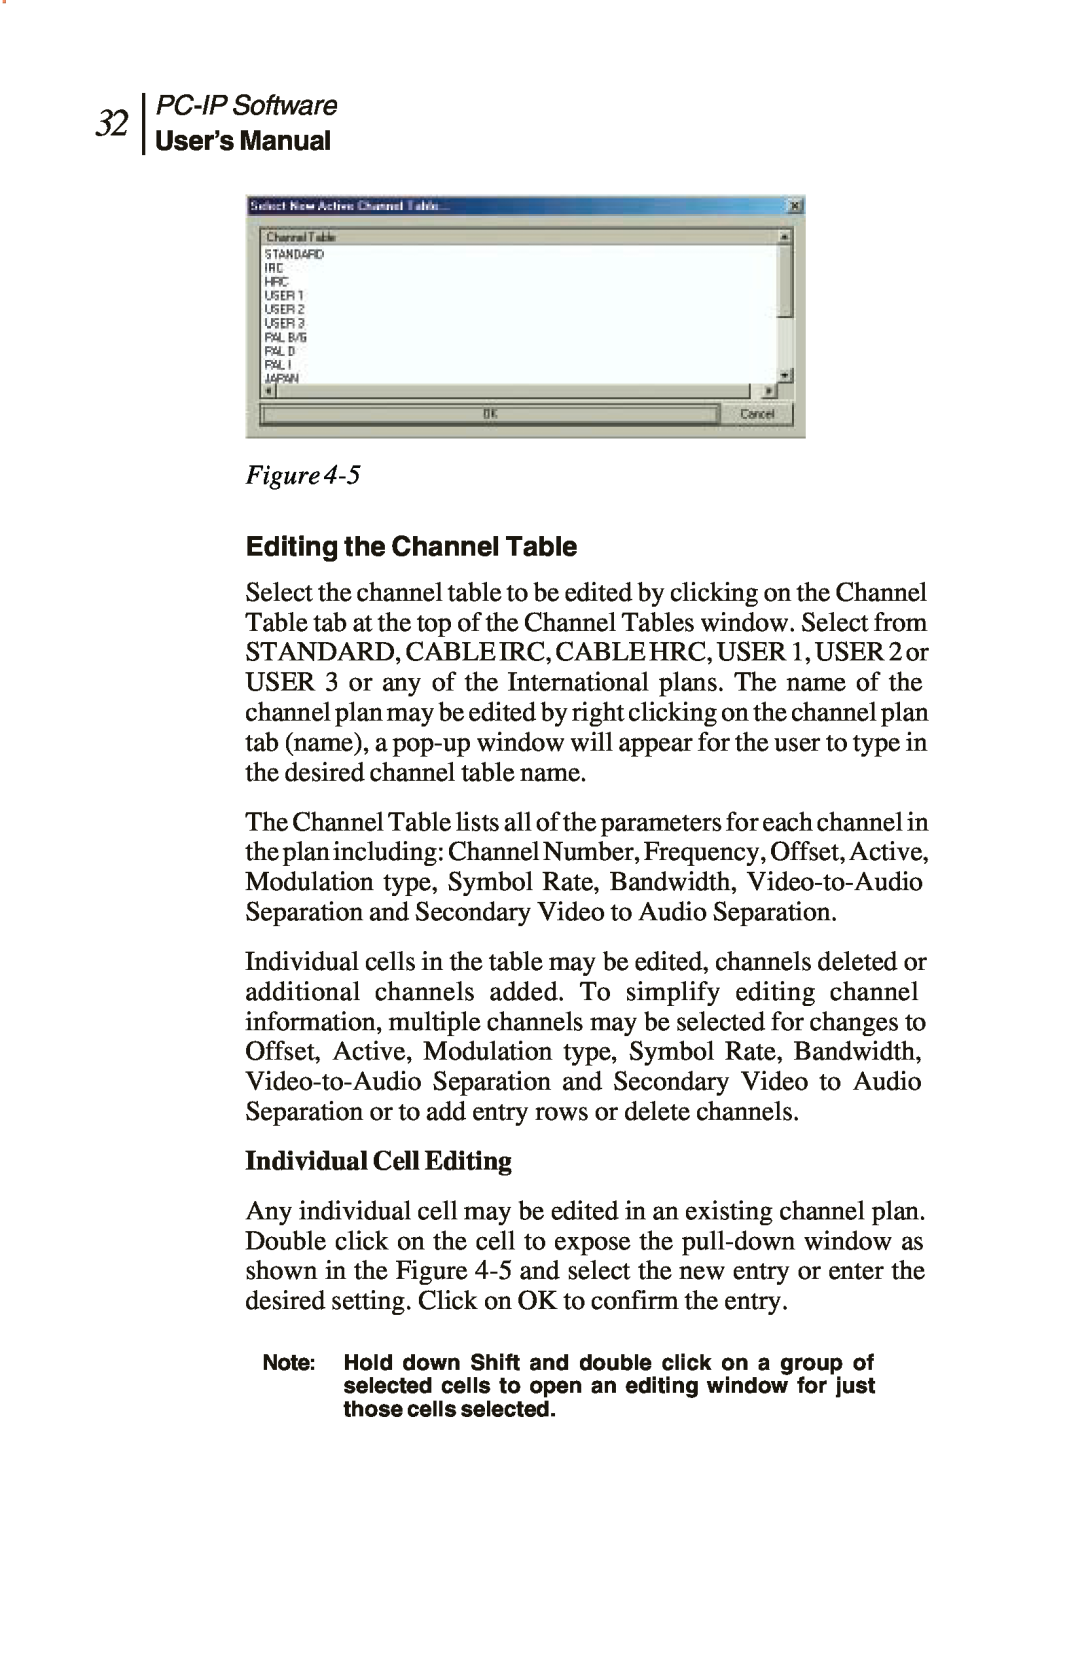 Sunrise Global CM250 IP, CM100 IP Editing the Channel Table, PC-IPSoftware, User’s Manual, Figure, Individual Cell Editing 